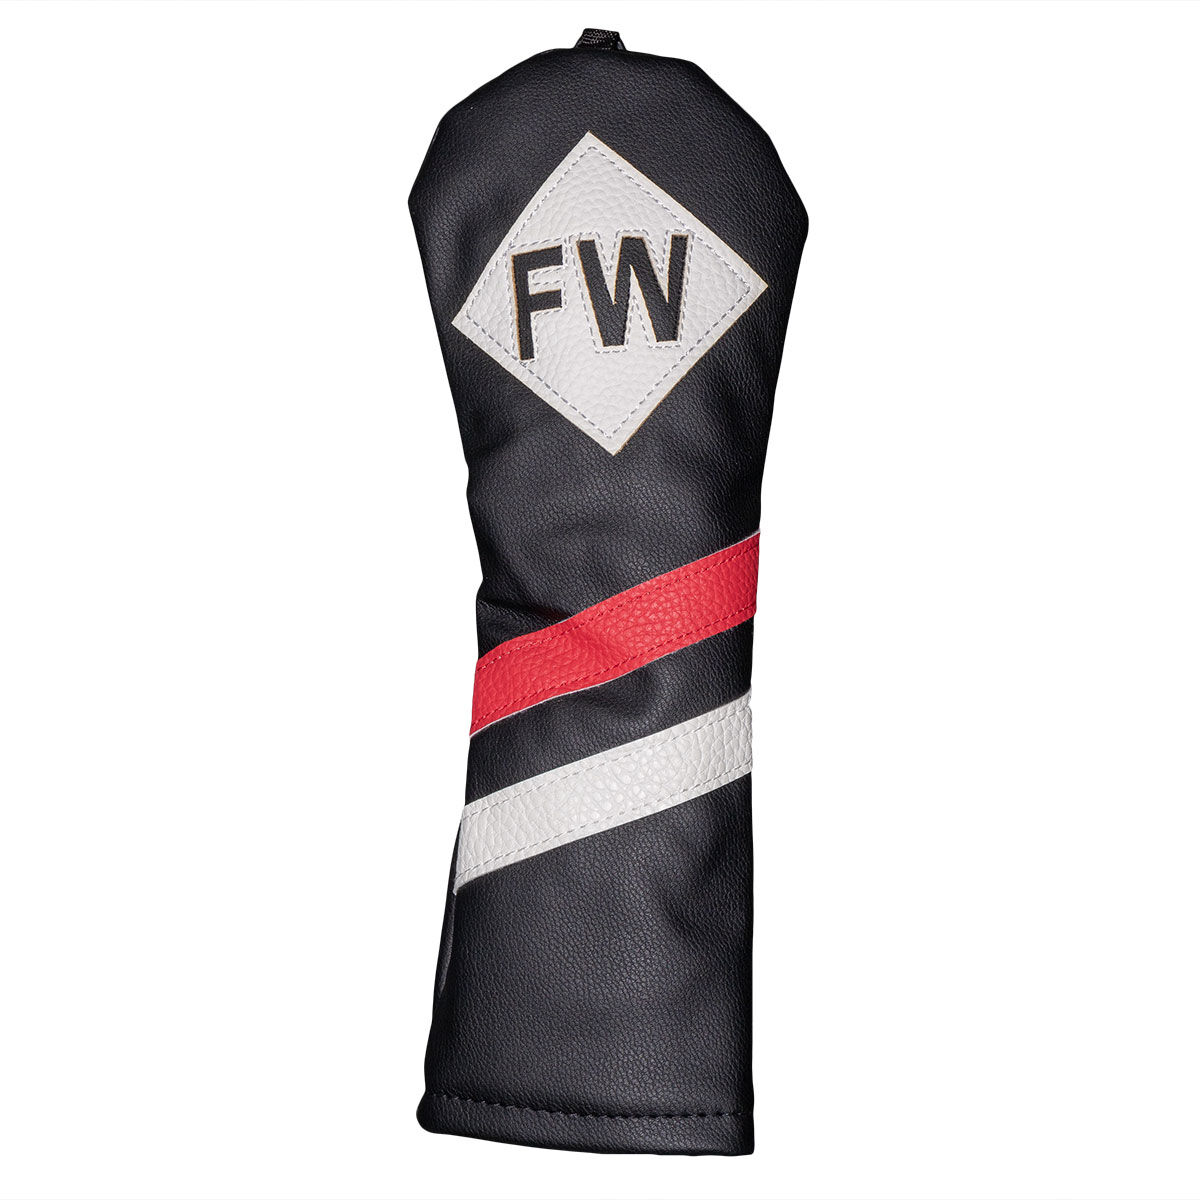 Fazer Black, White and Red Adjustable Vintage Golf Fairway Head Cover, One size | American Golf